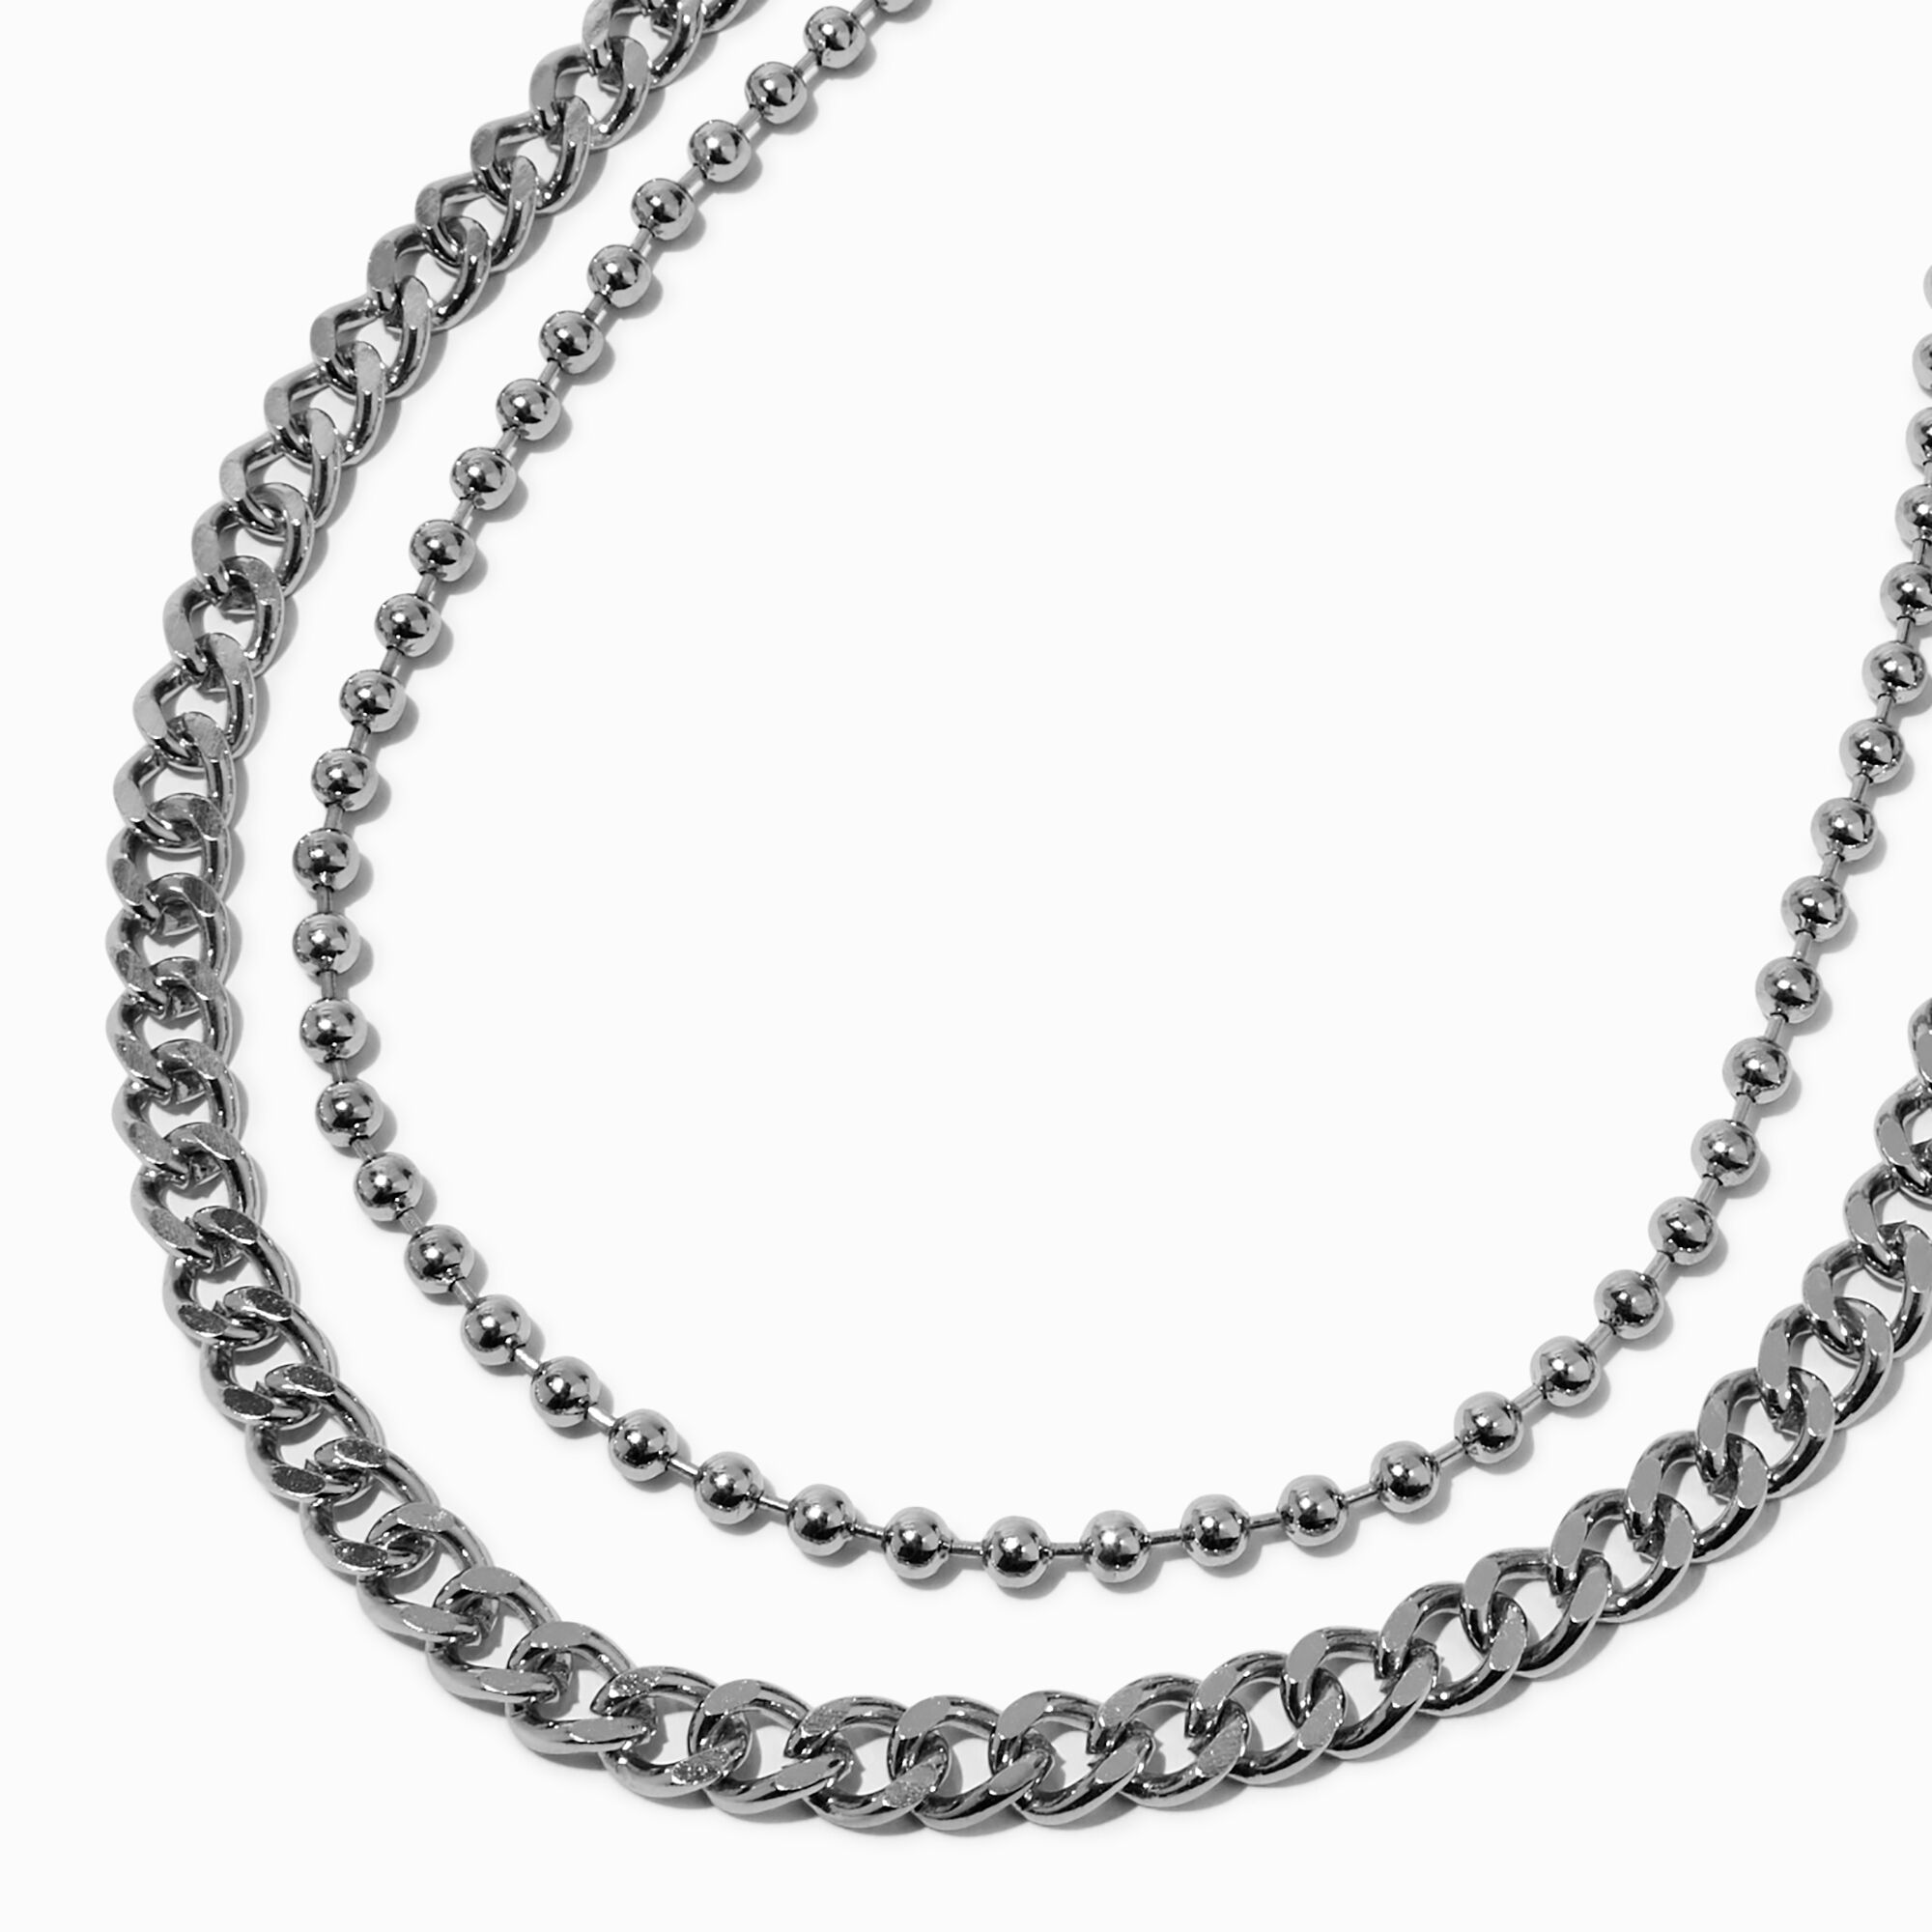 View Claires Tone Curb Ball Chain MultiStrand Necklace Silver information